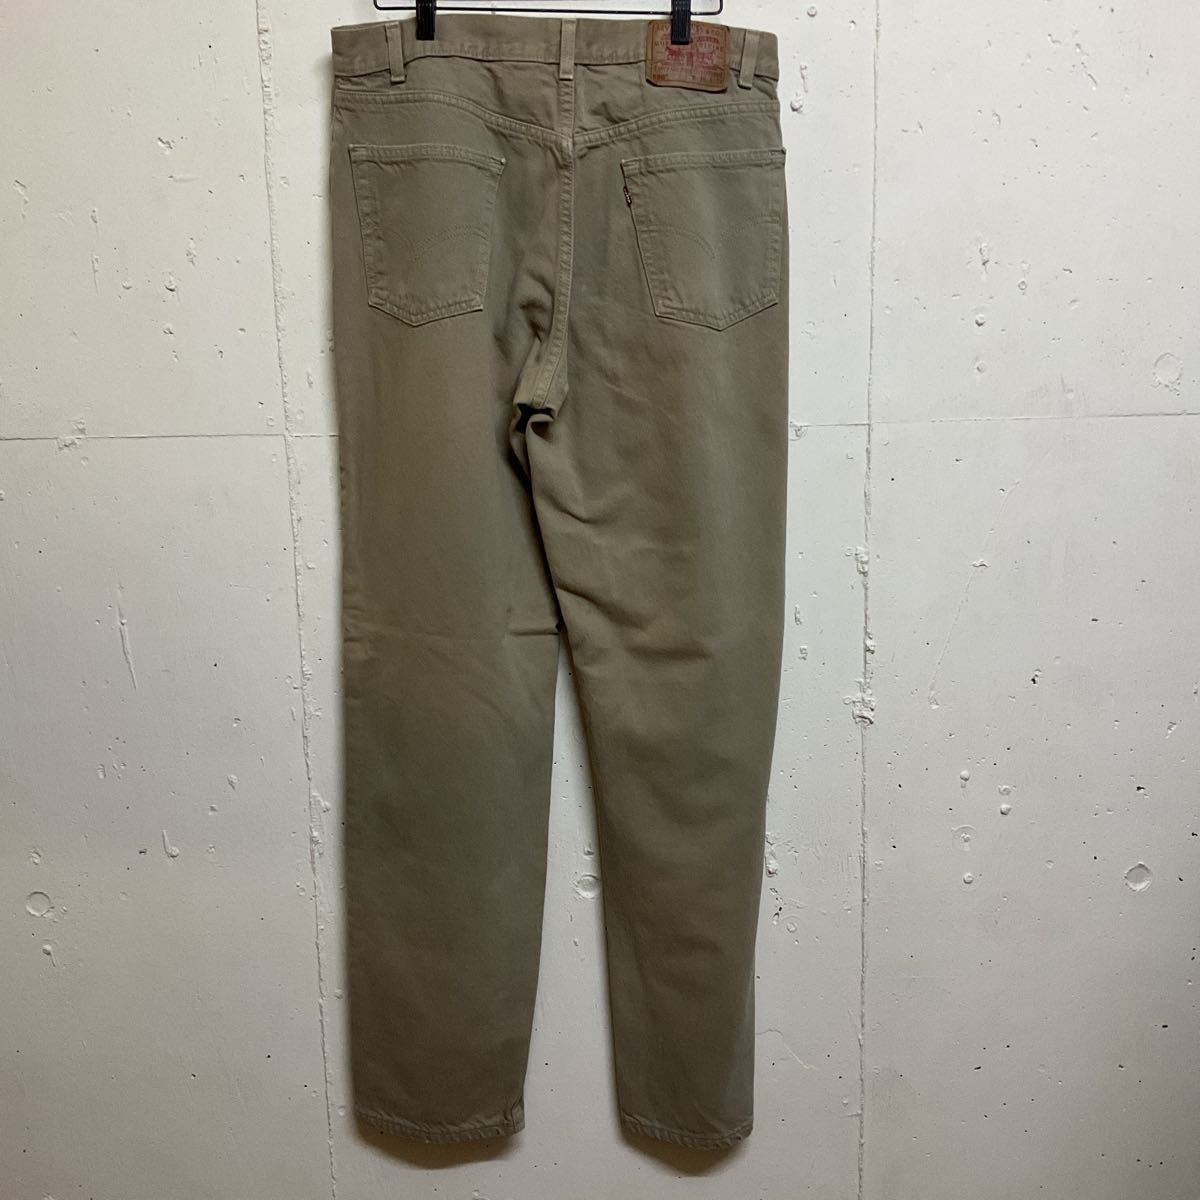 USA製 リーバイス Levi's 550 RELAXED FIT 36×34 カラーパンツ デニム 古着_画像2